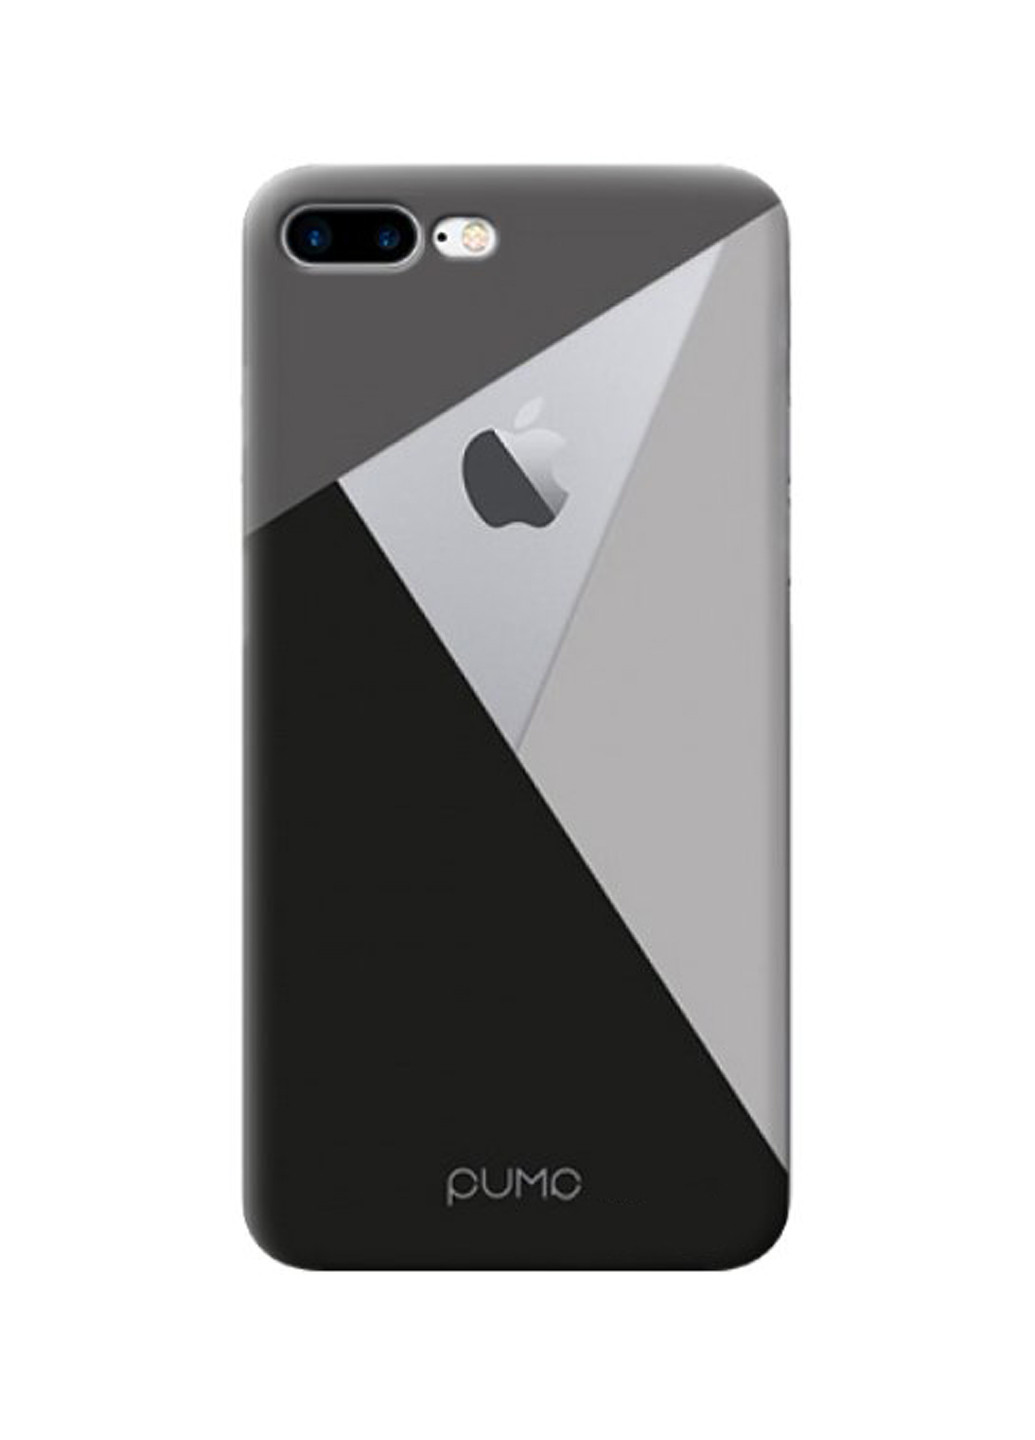 Чохол Transperency Case for iPhone 8 Plus / 7 Plus Black / Gray Pump transperency case для iphone 8 plus/7 plus black/gray (136993558)